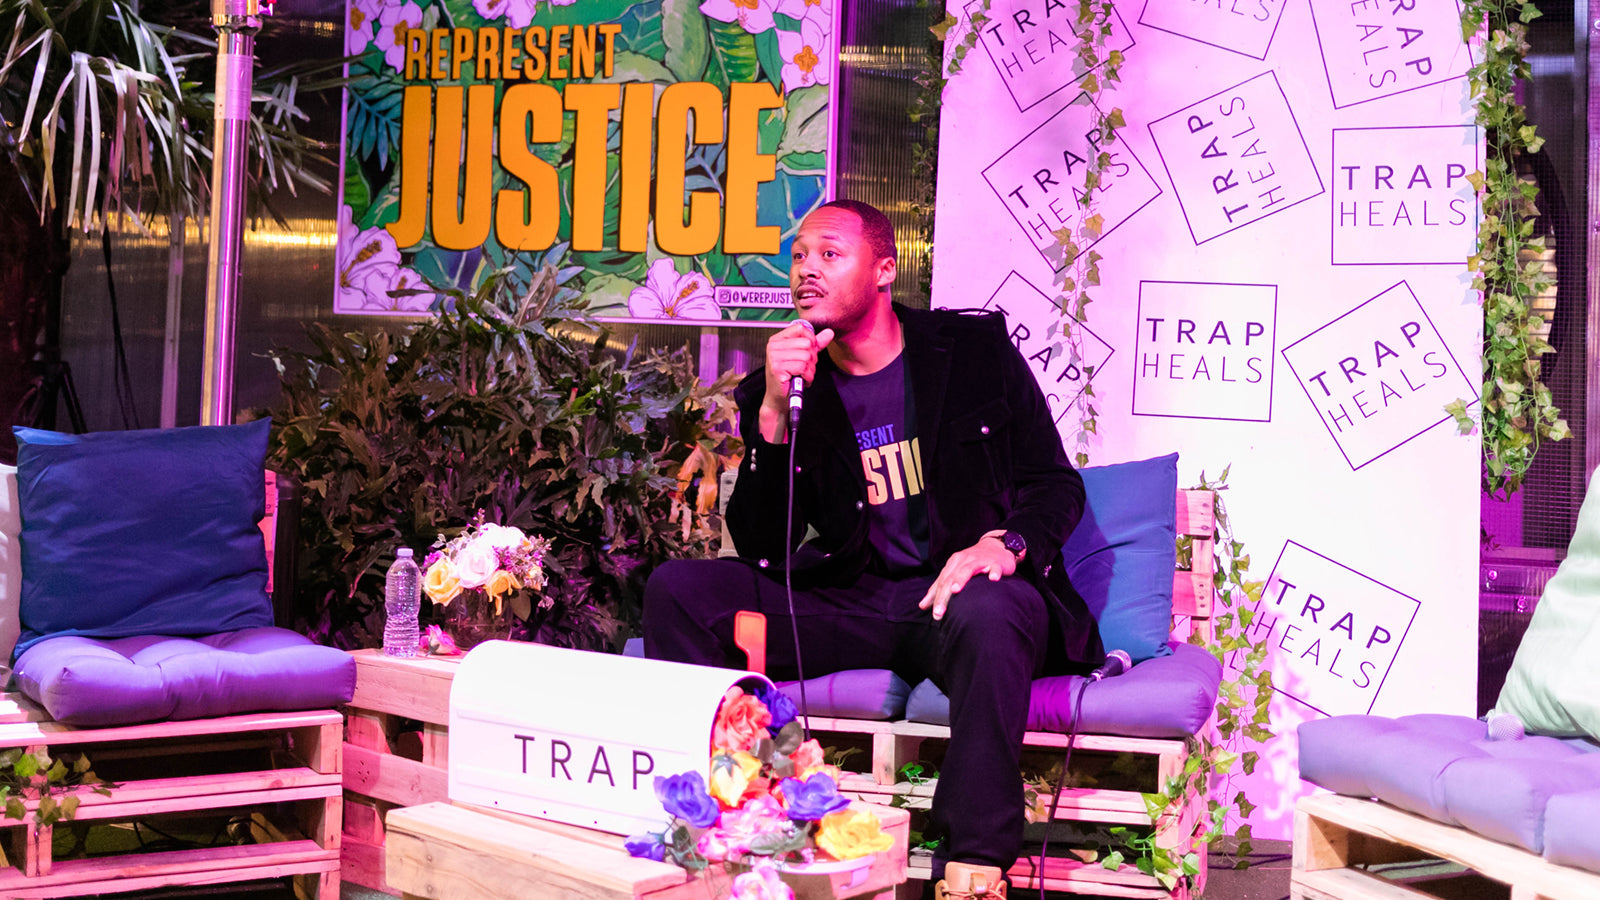 A man speaking at a Represent Justice event